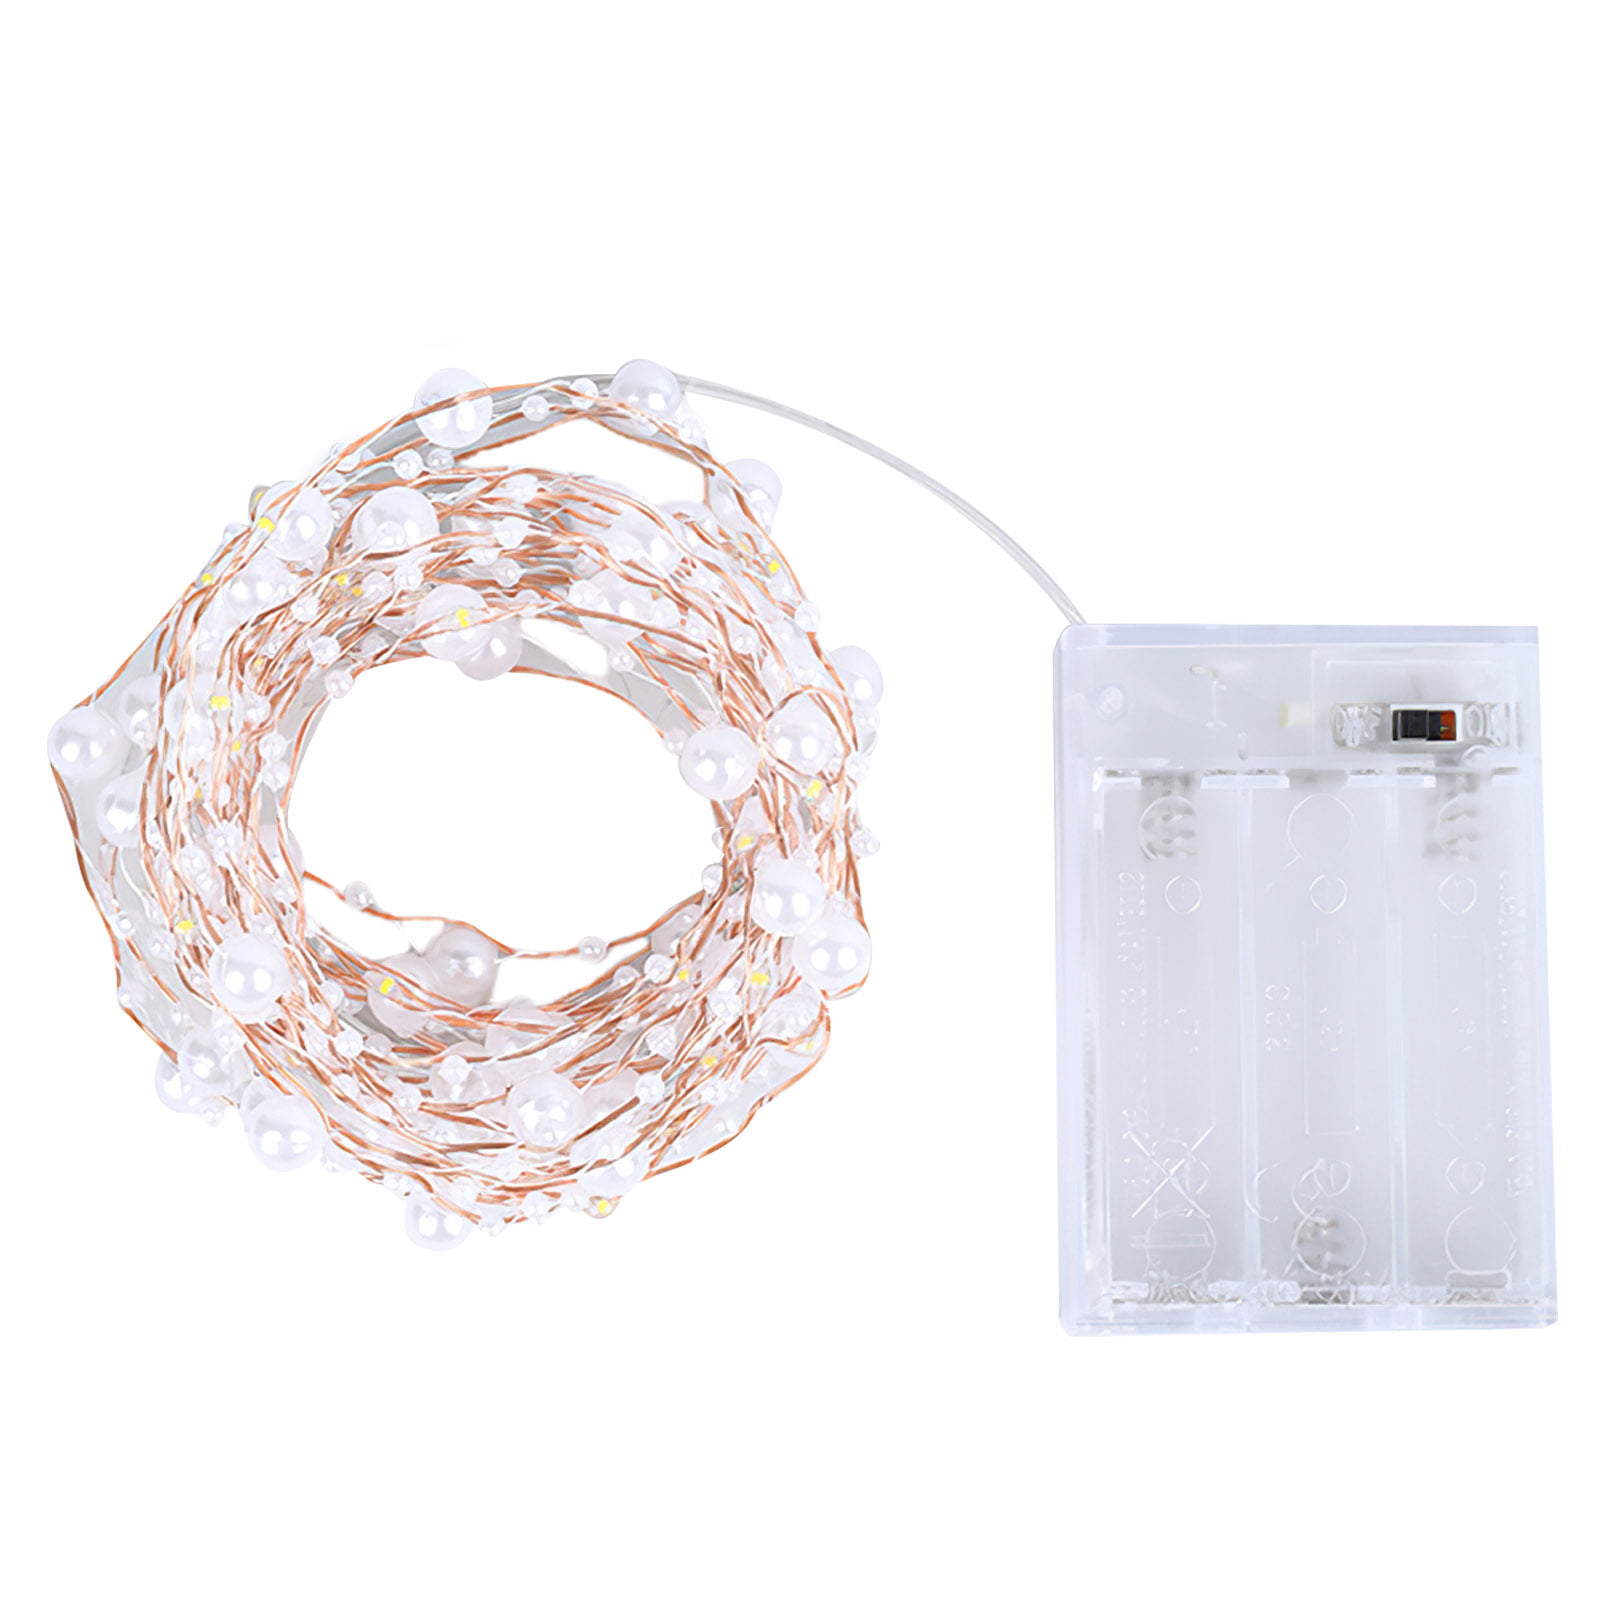 Details about   2-10M 20-100LEDs Pearl Bead LED String Light Fairy Lights For Party Home Decor 